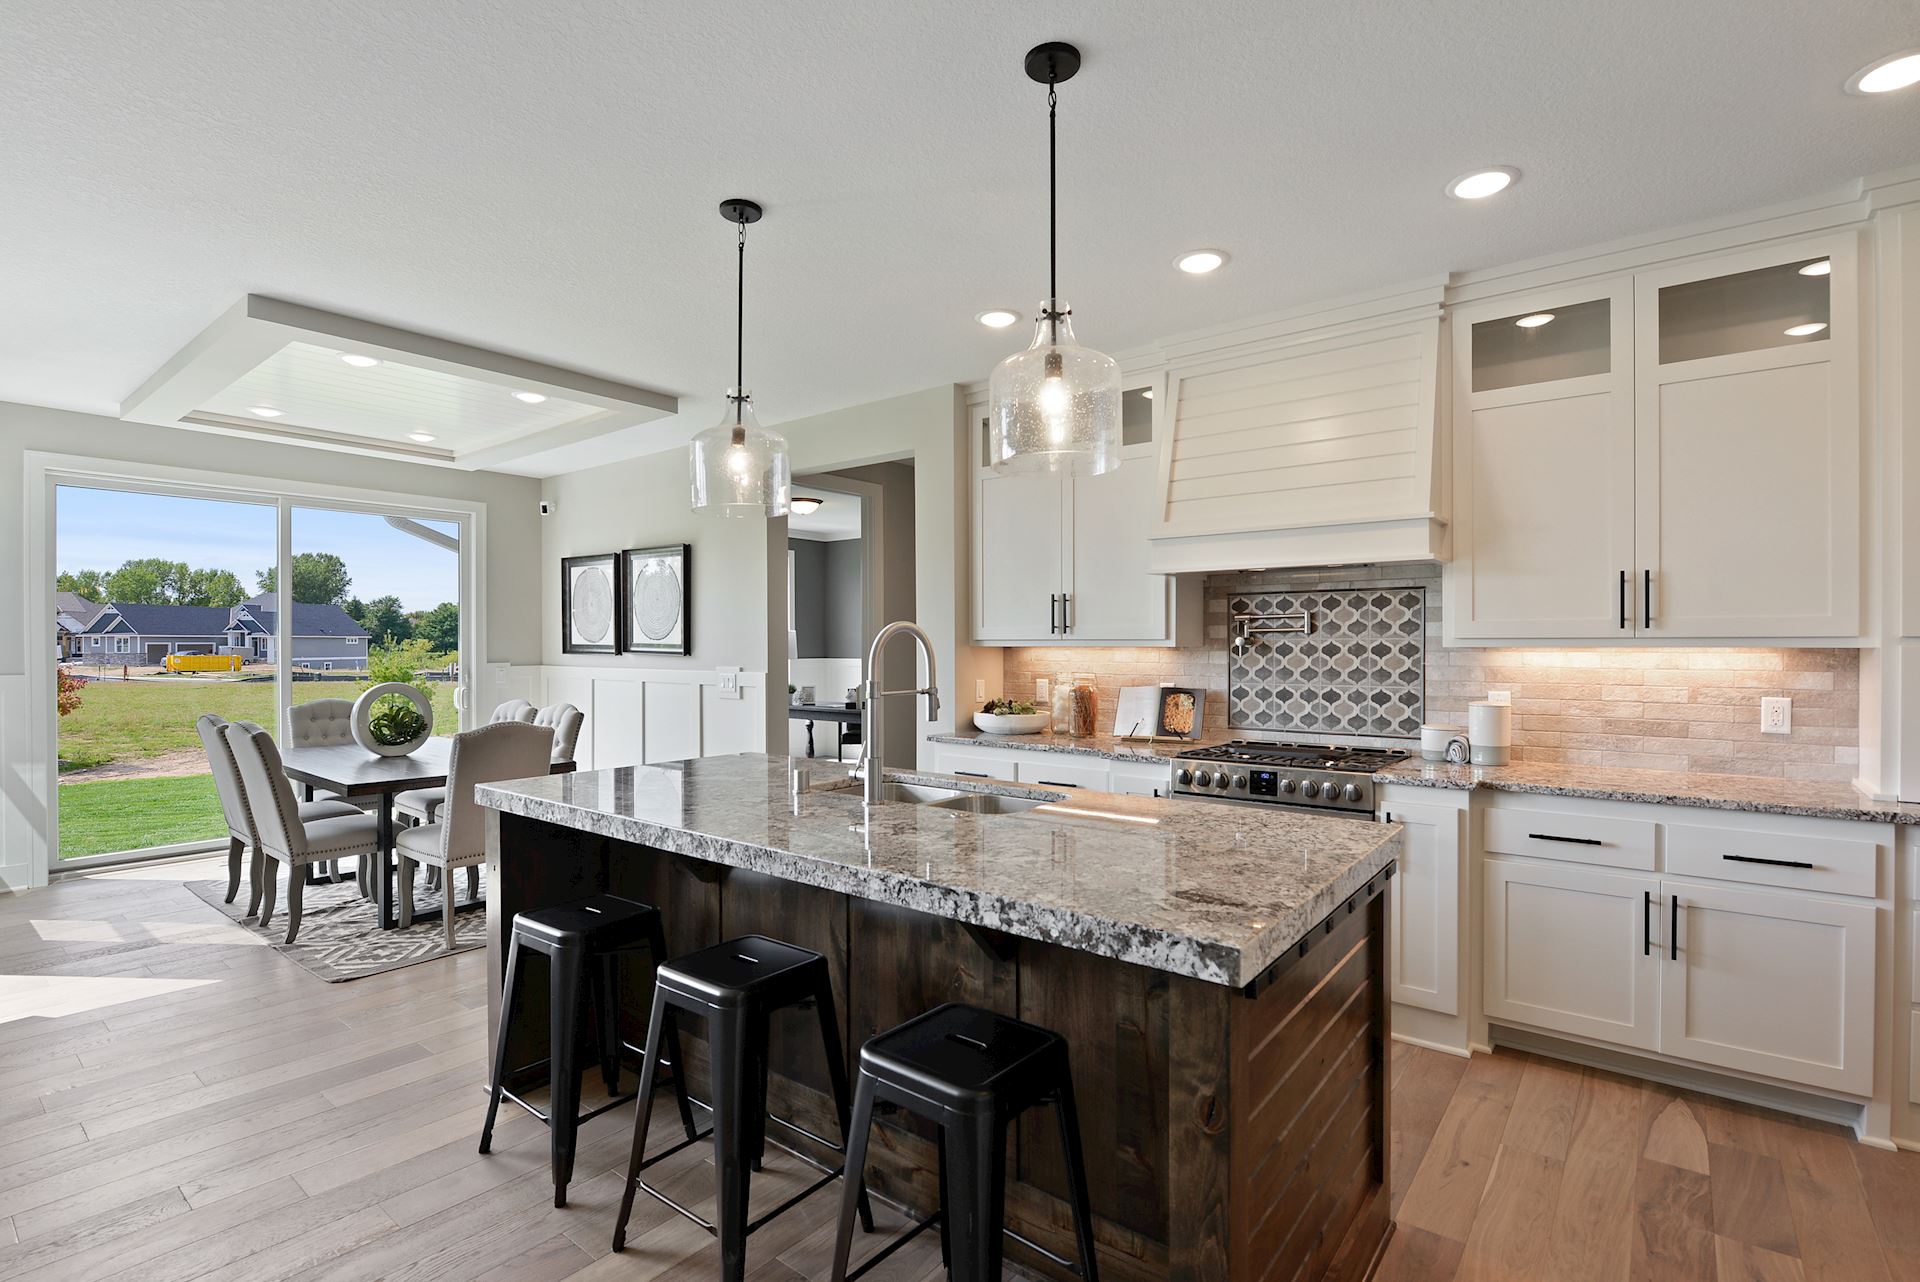 Custom designed kitchen and cabinetry with large island